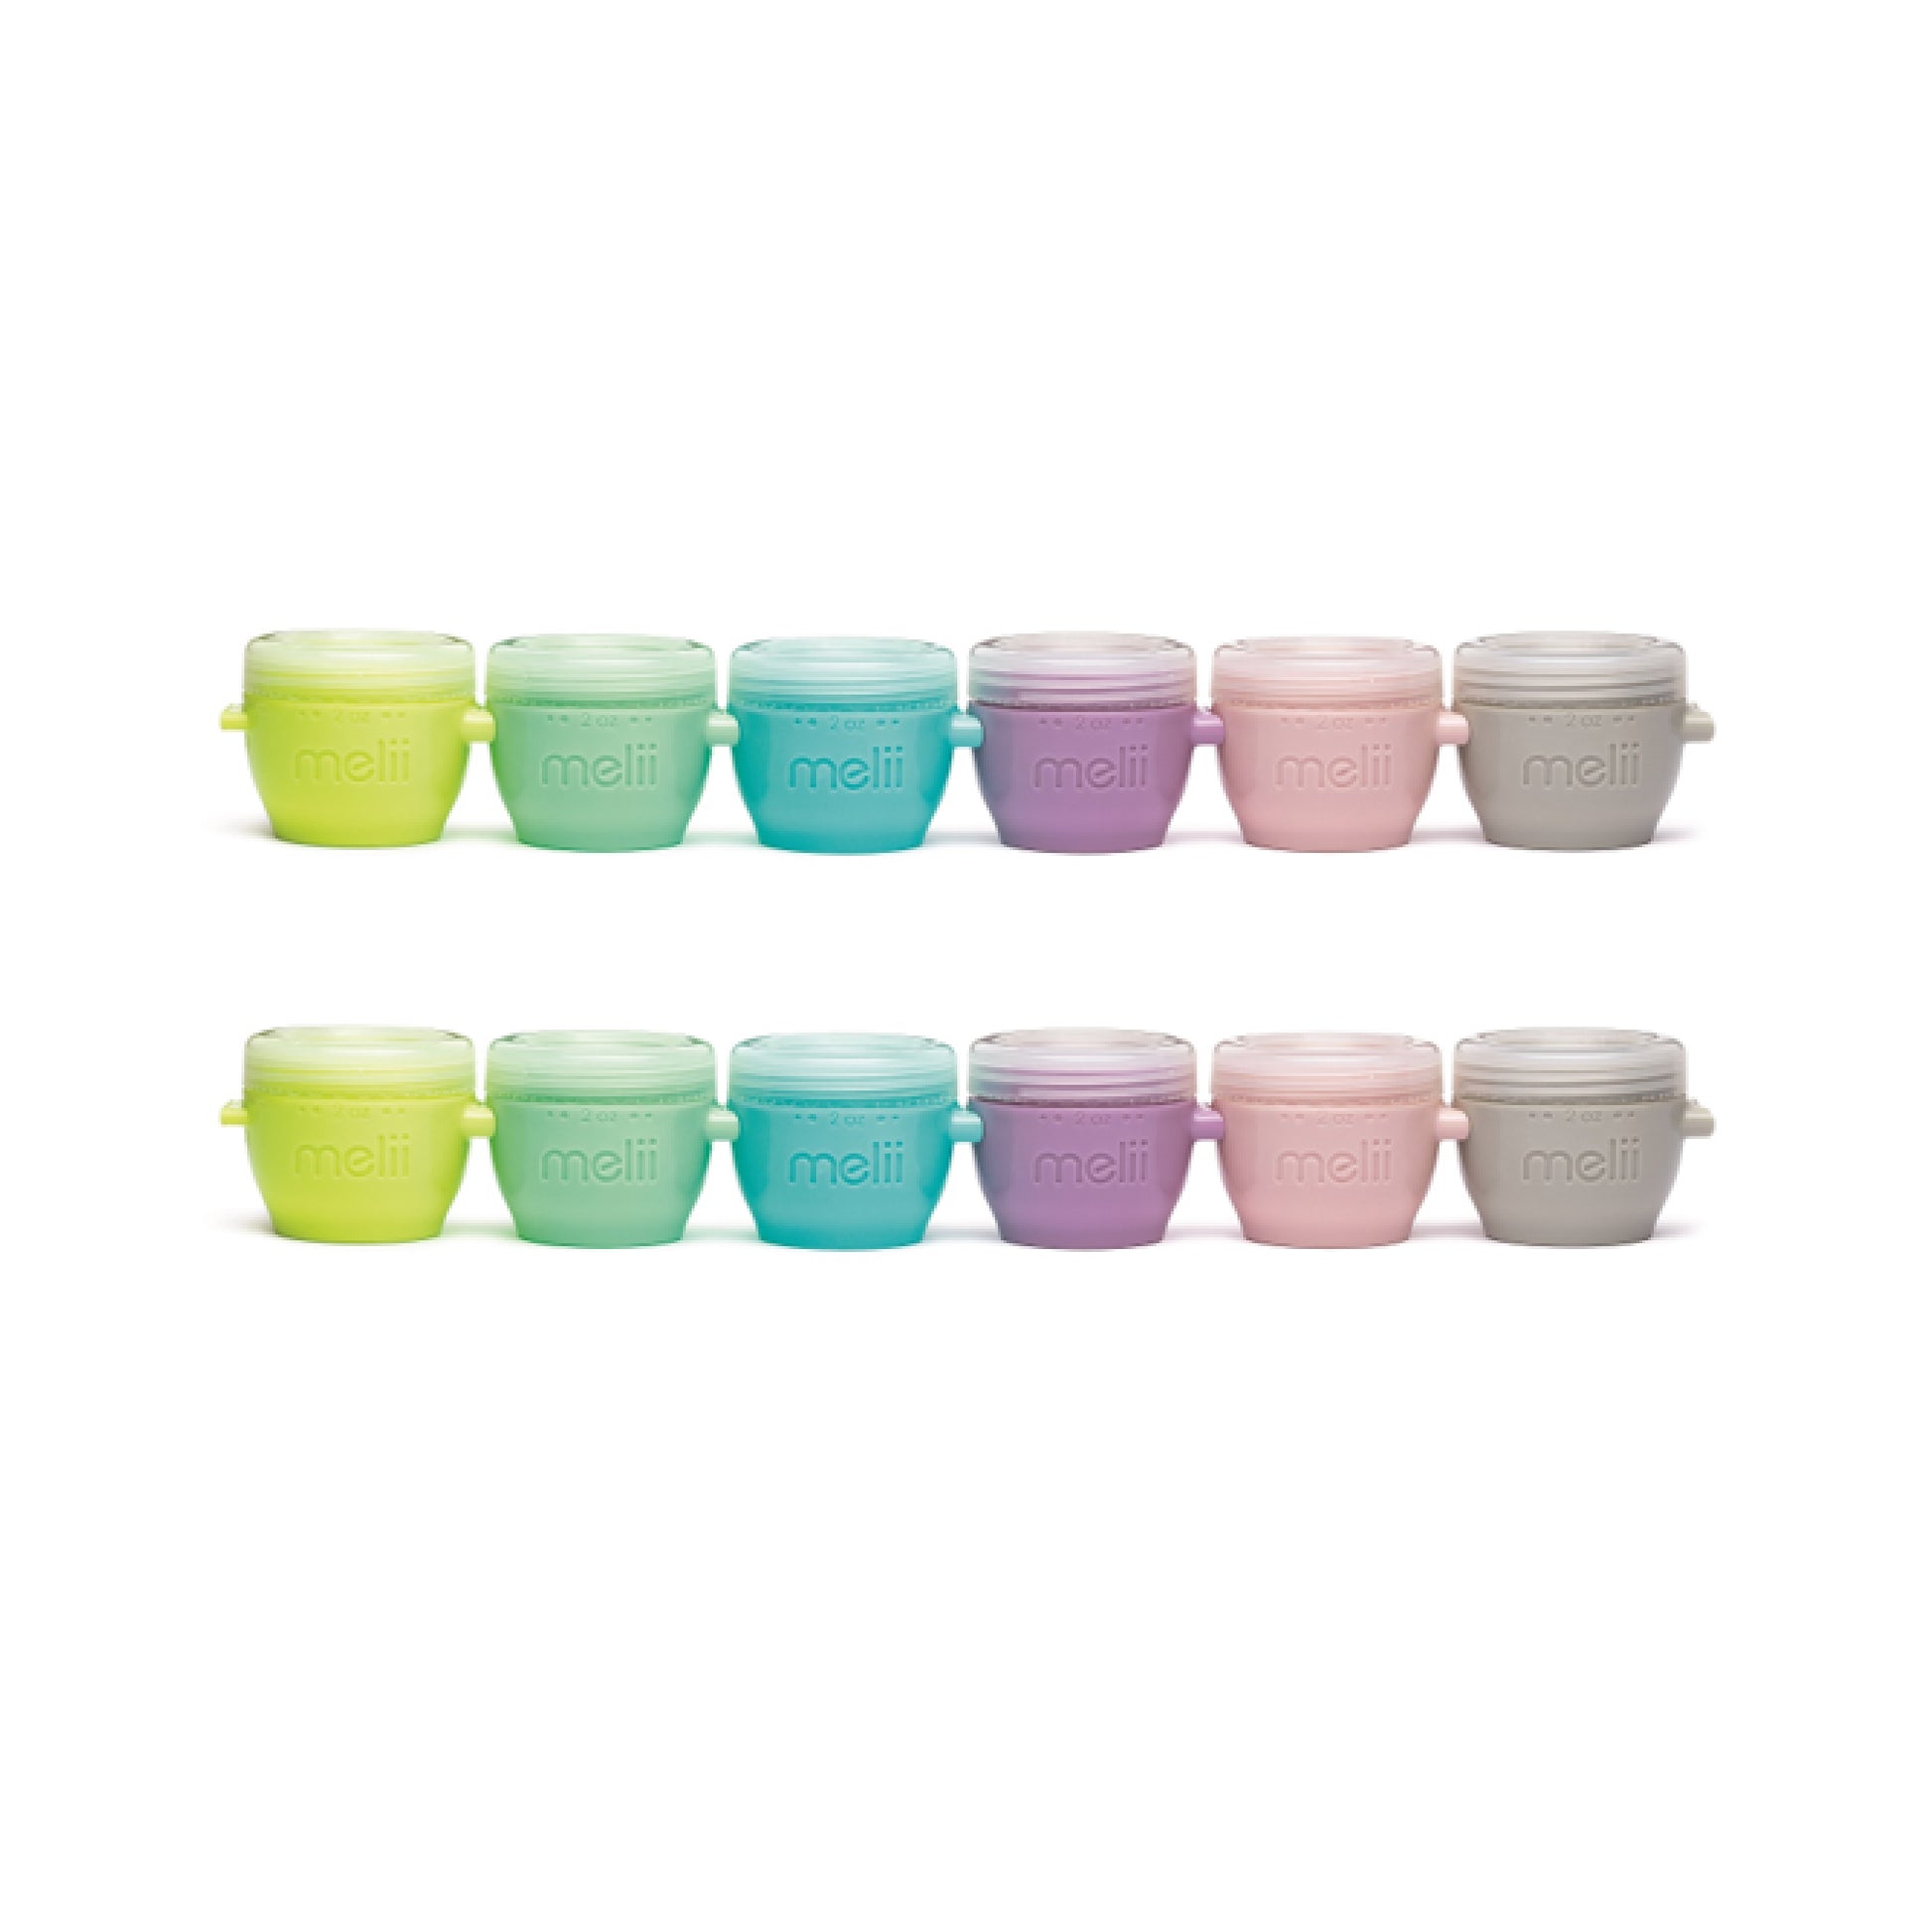 Melii Snap & Go Pods - Airtight & Leakproof Baby Food Containers - Baby Food Storage Pods for Effortless Mealtime, 2oz, Set of 12